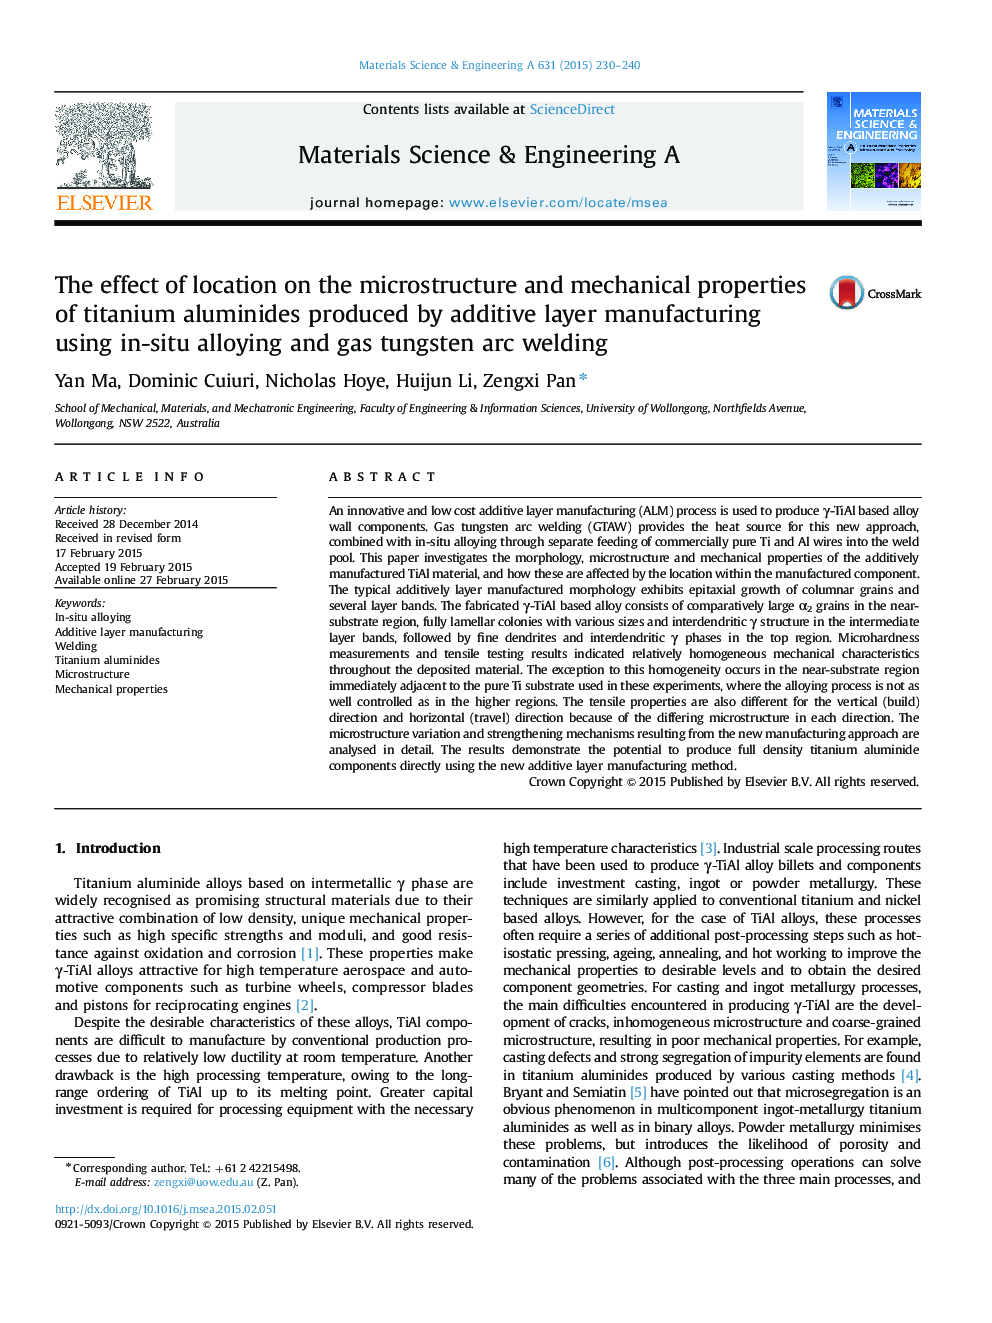 The effect of location on the microstructure and mechanical properties of titanium aluminides produced by additive layer manufacturing using in-situ alloying and gas tungsten arc welding